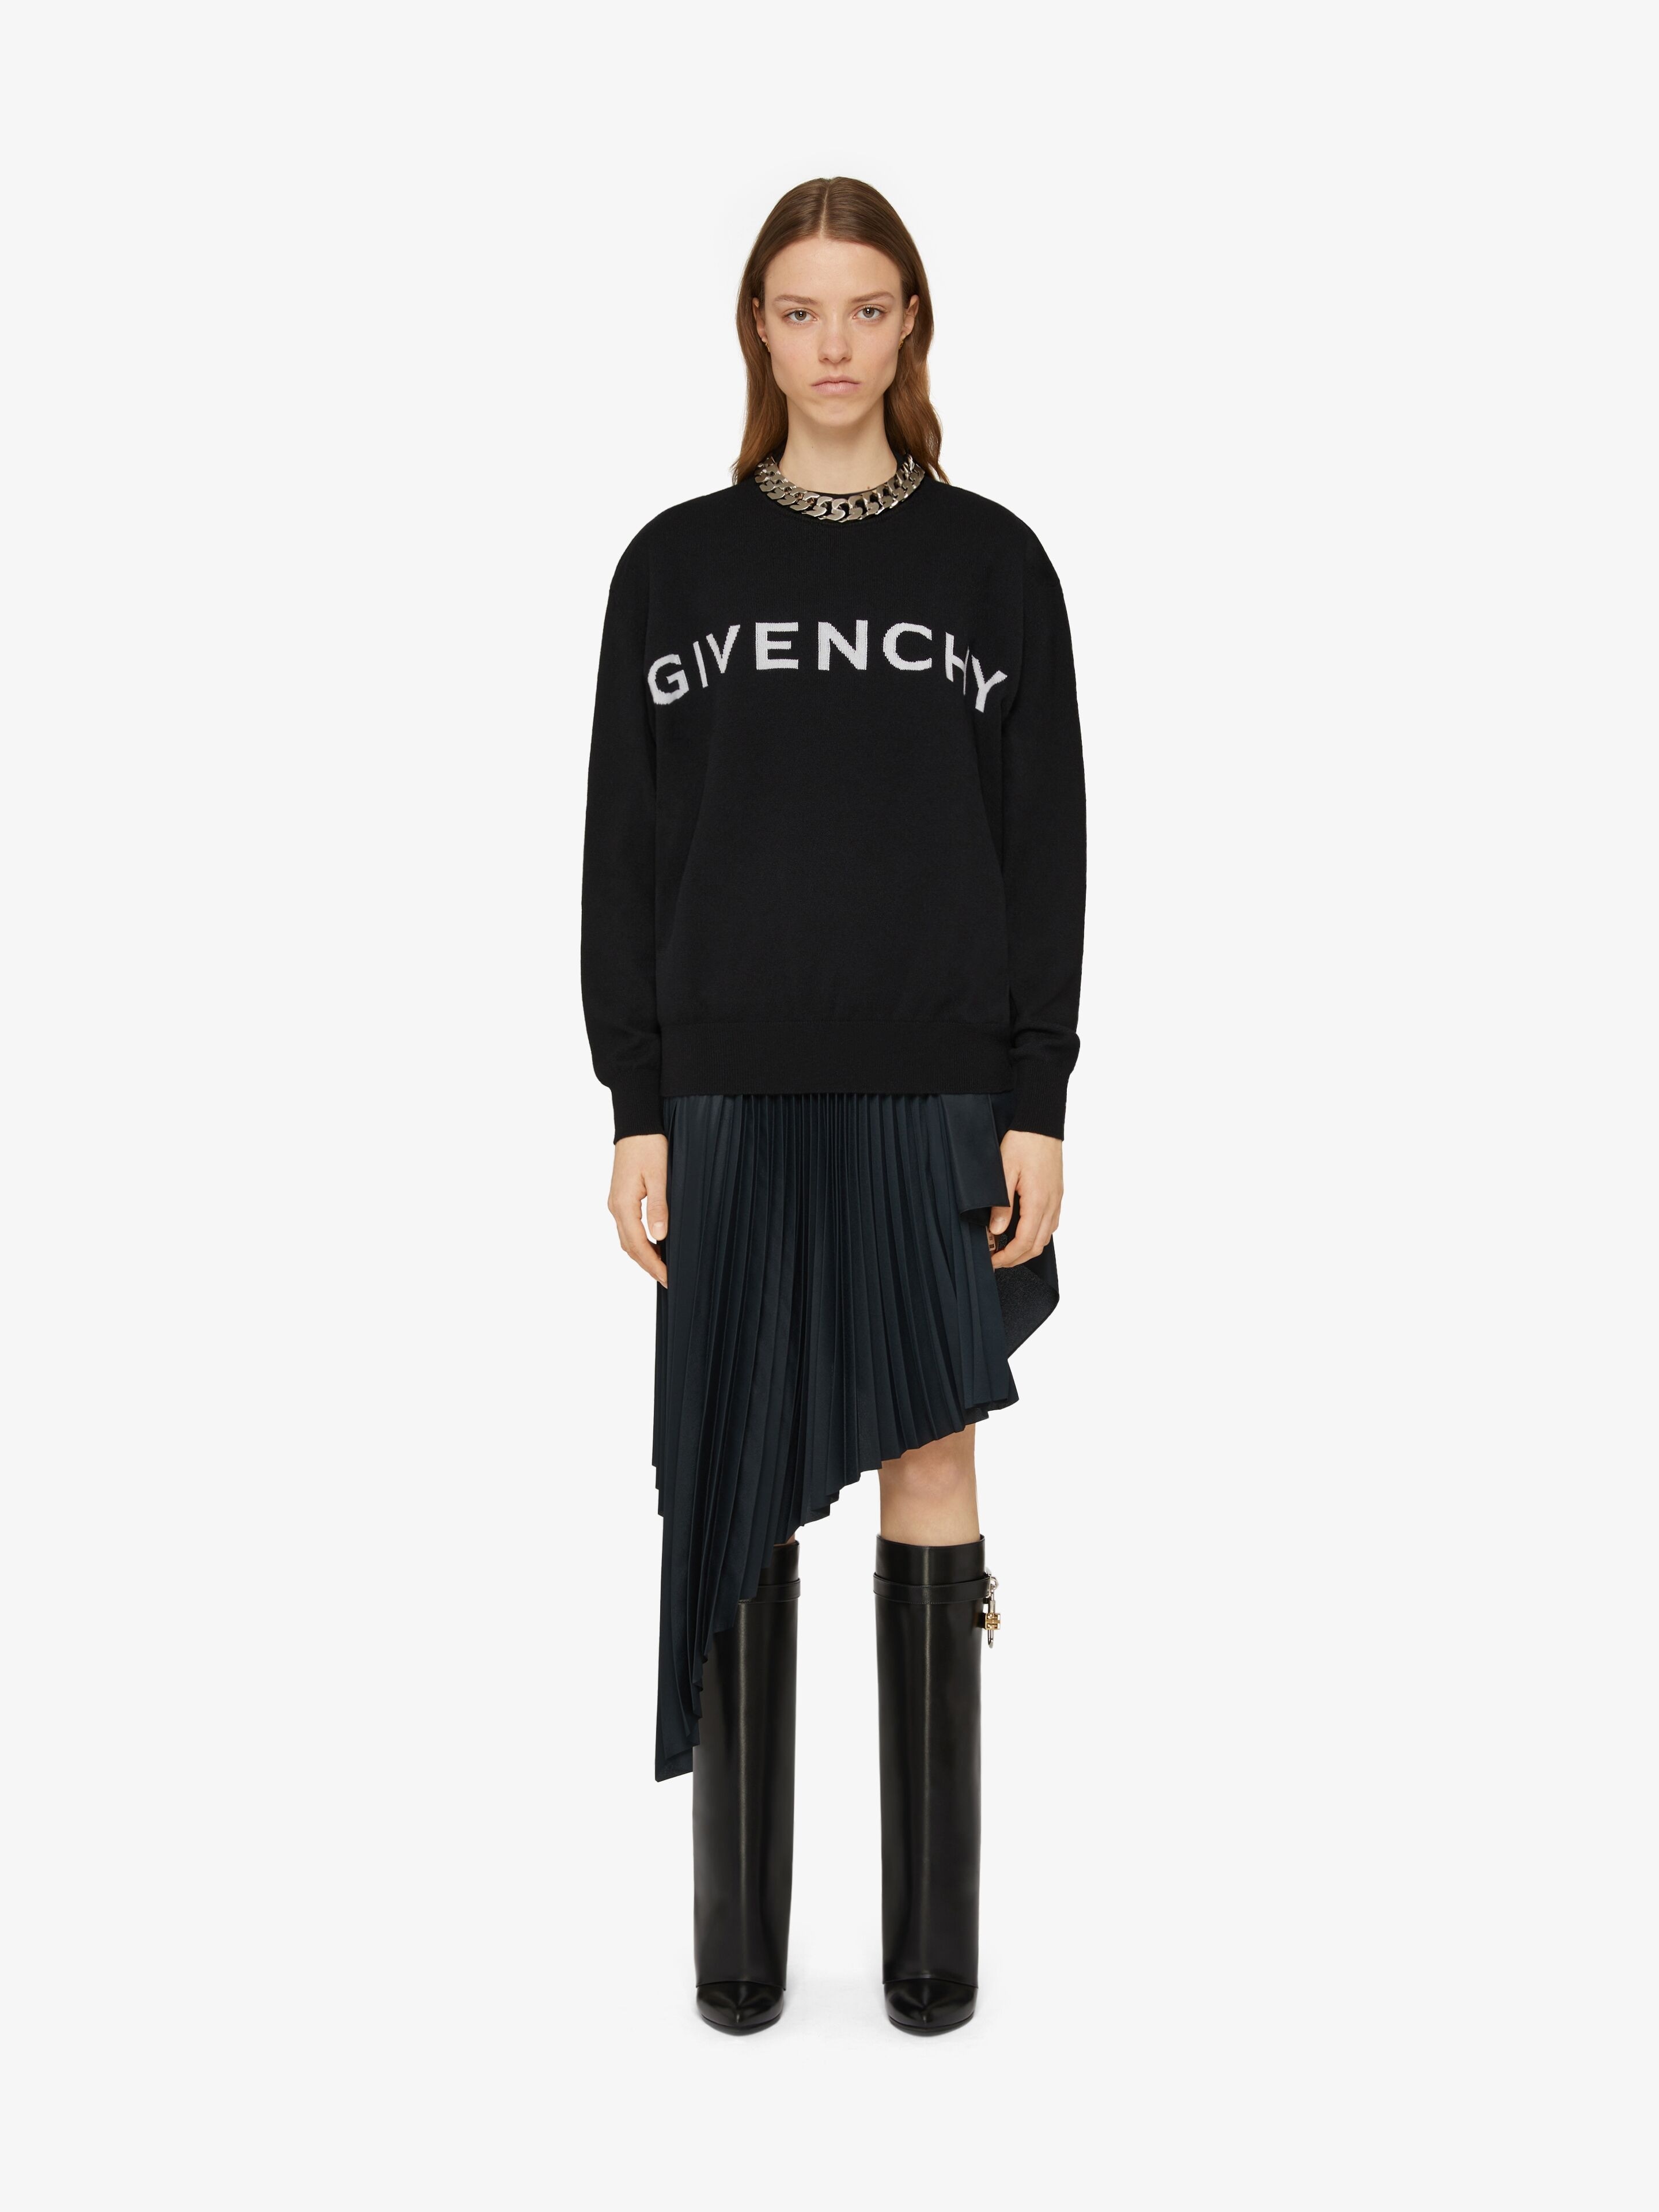 givenchy's post